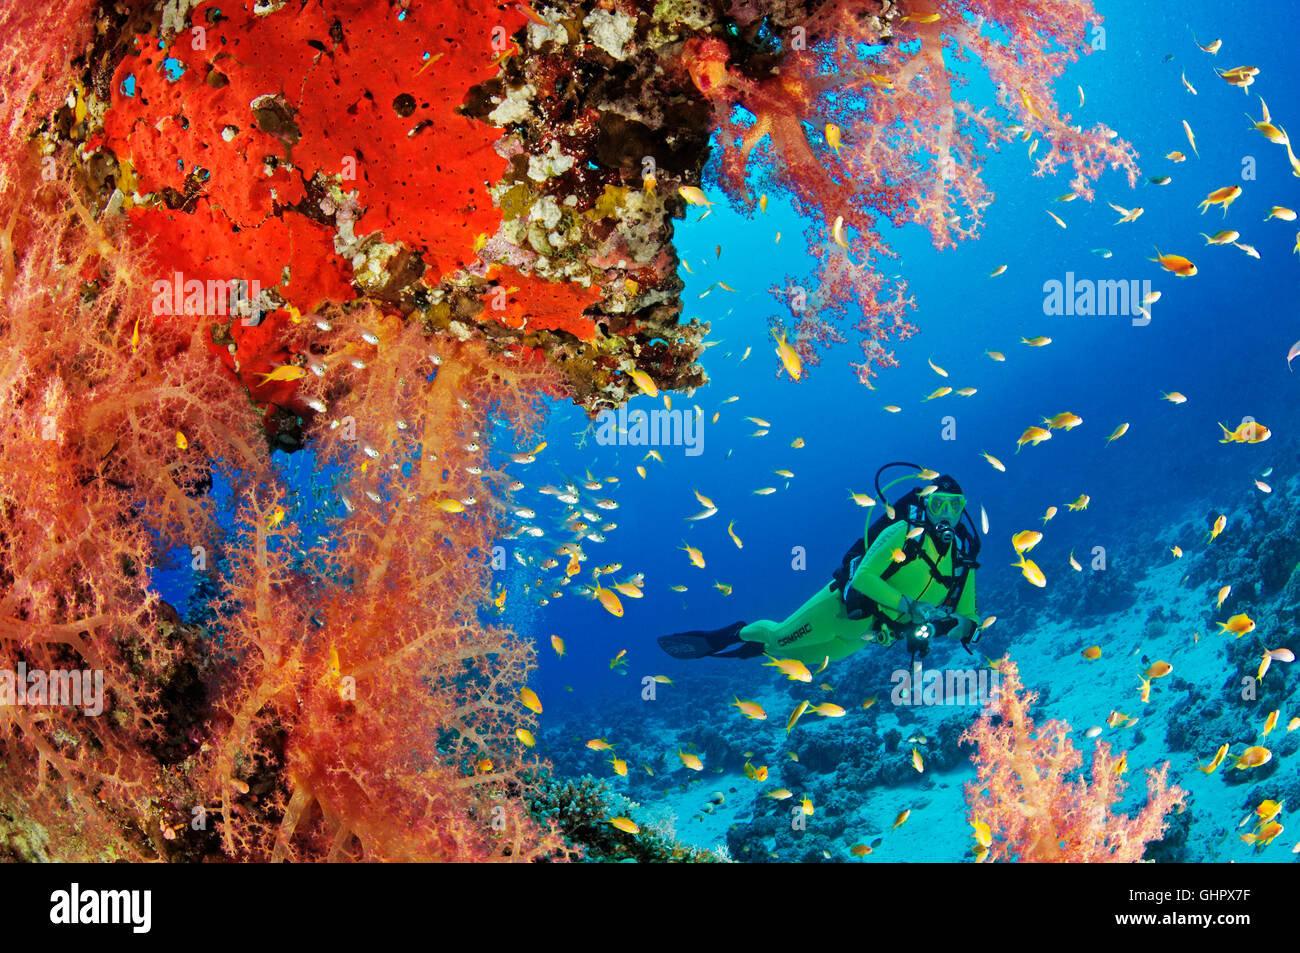 Coral reef with Hemprichs Red Soft Tree Coral and scuba diver, Hurghada, Giftun Island Reef, Red Sea, Egypt Stock Photo